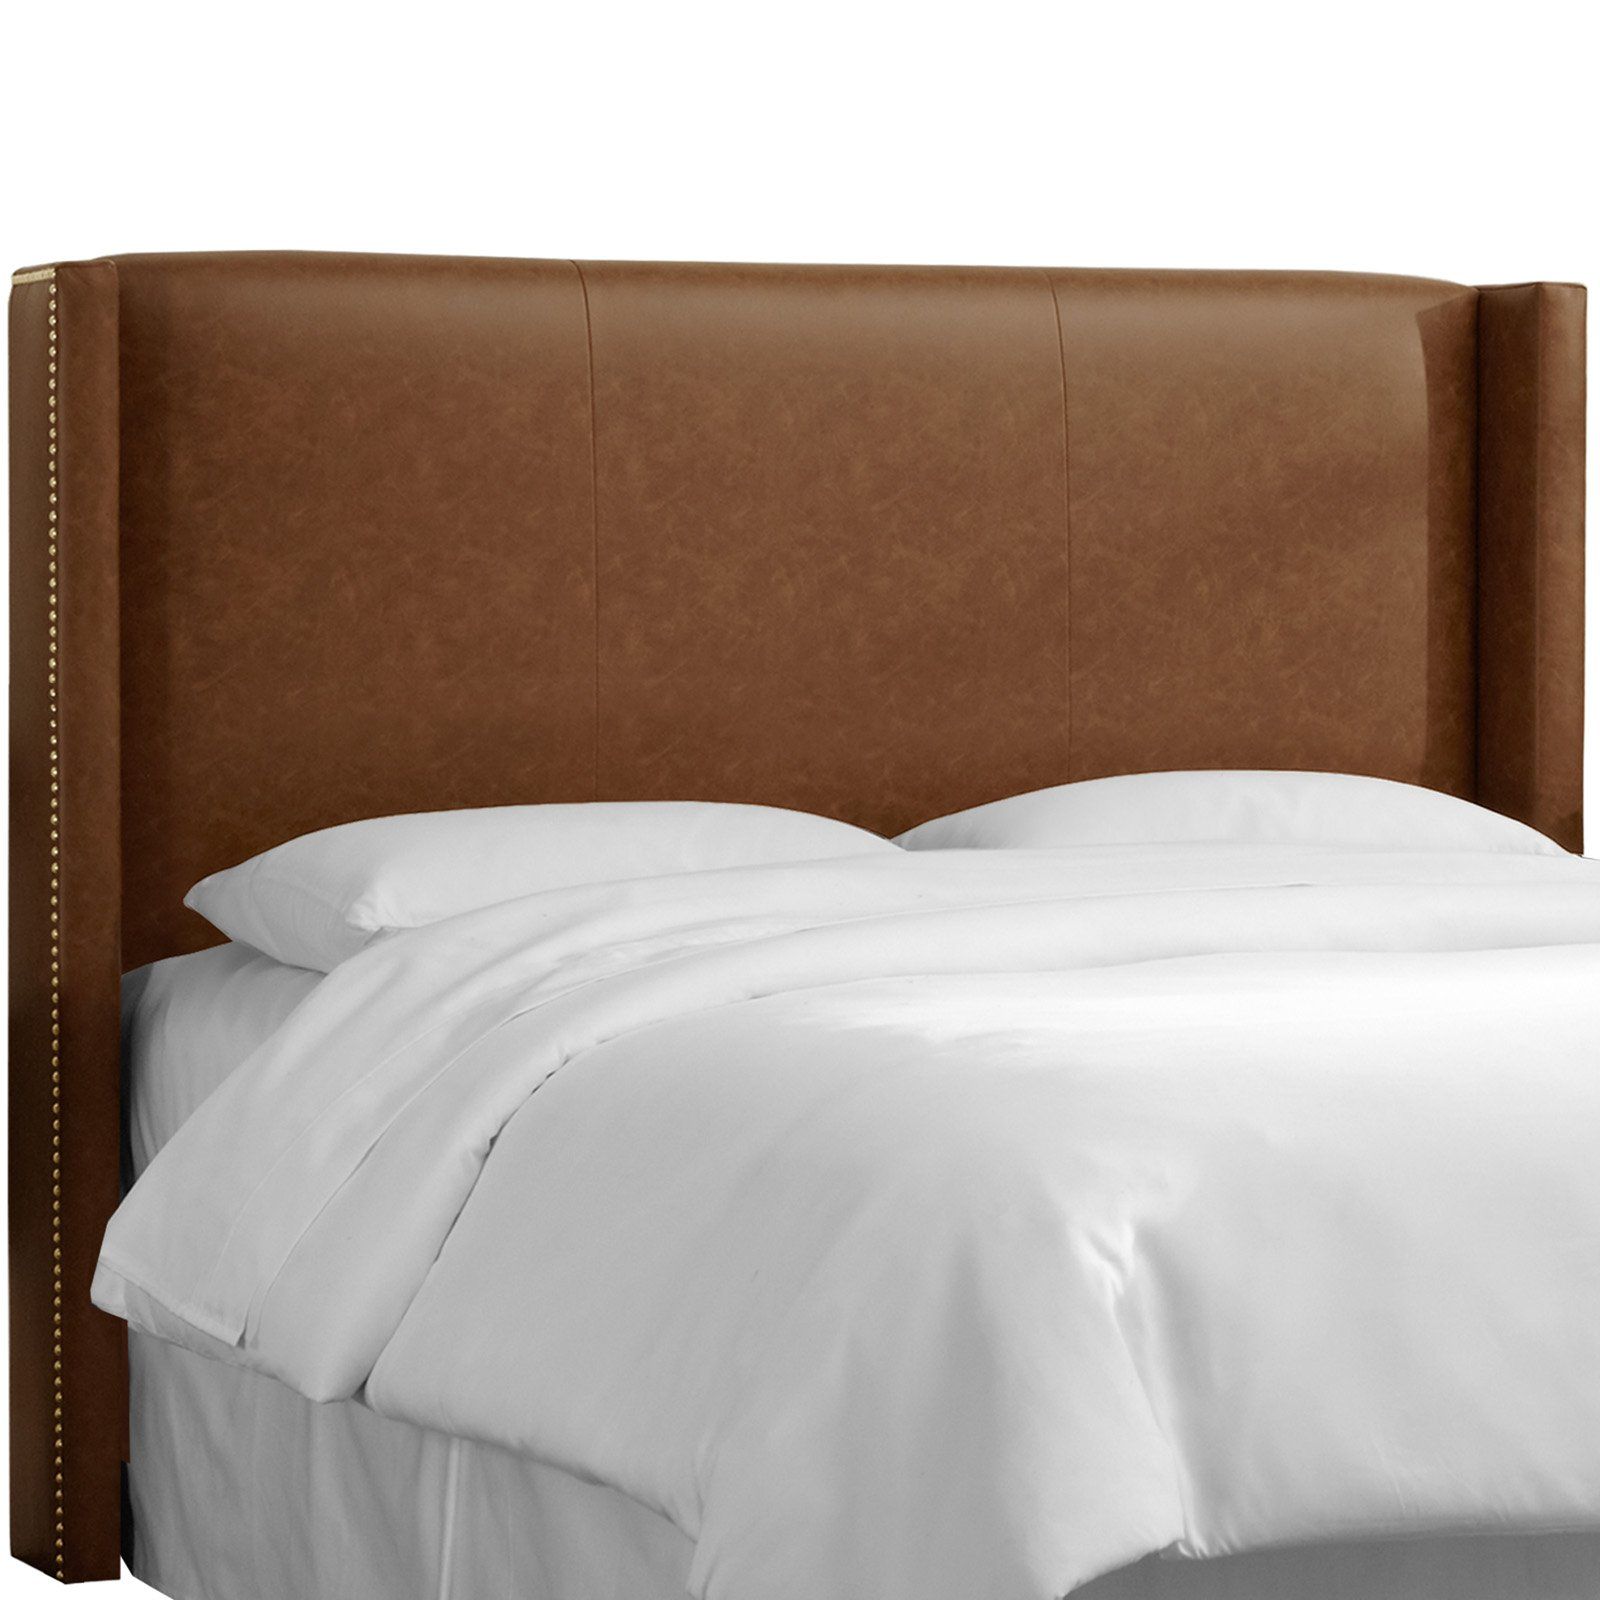 Nail Button Wingback Bonded Leather Upholstered Headboard Sonoran Saddle Brown, Size: Queen -   19 diy Headboard leather ideas